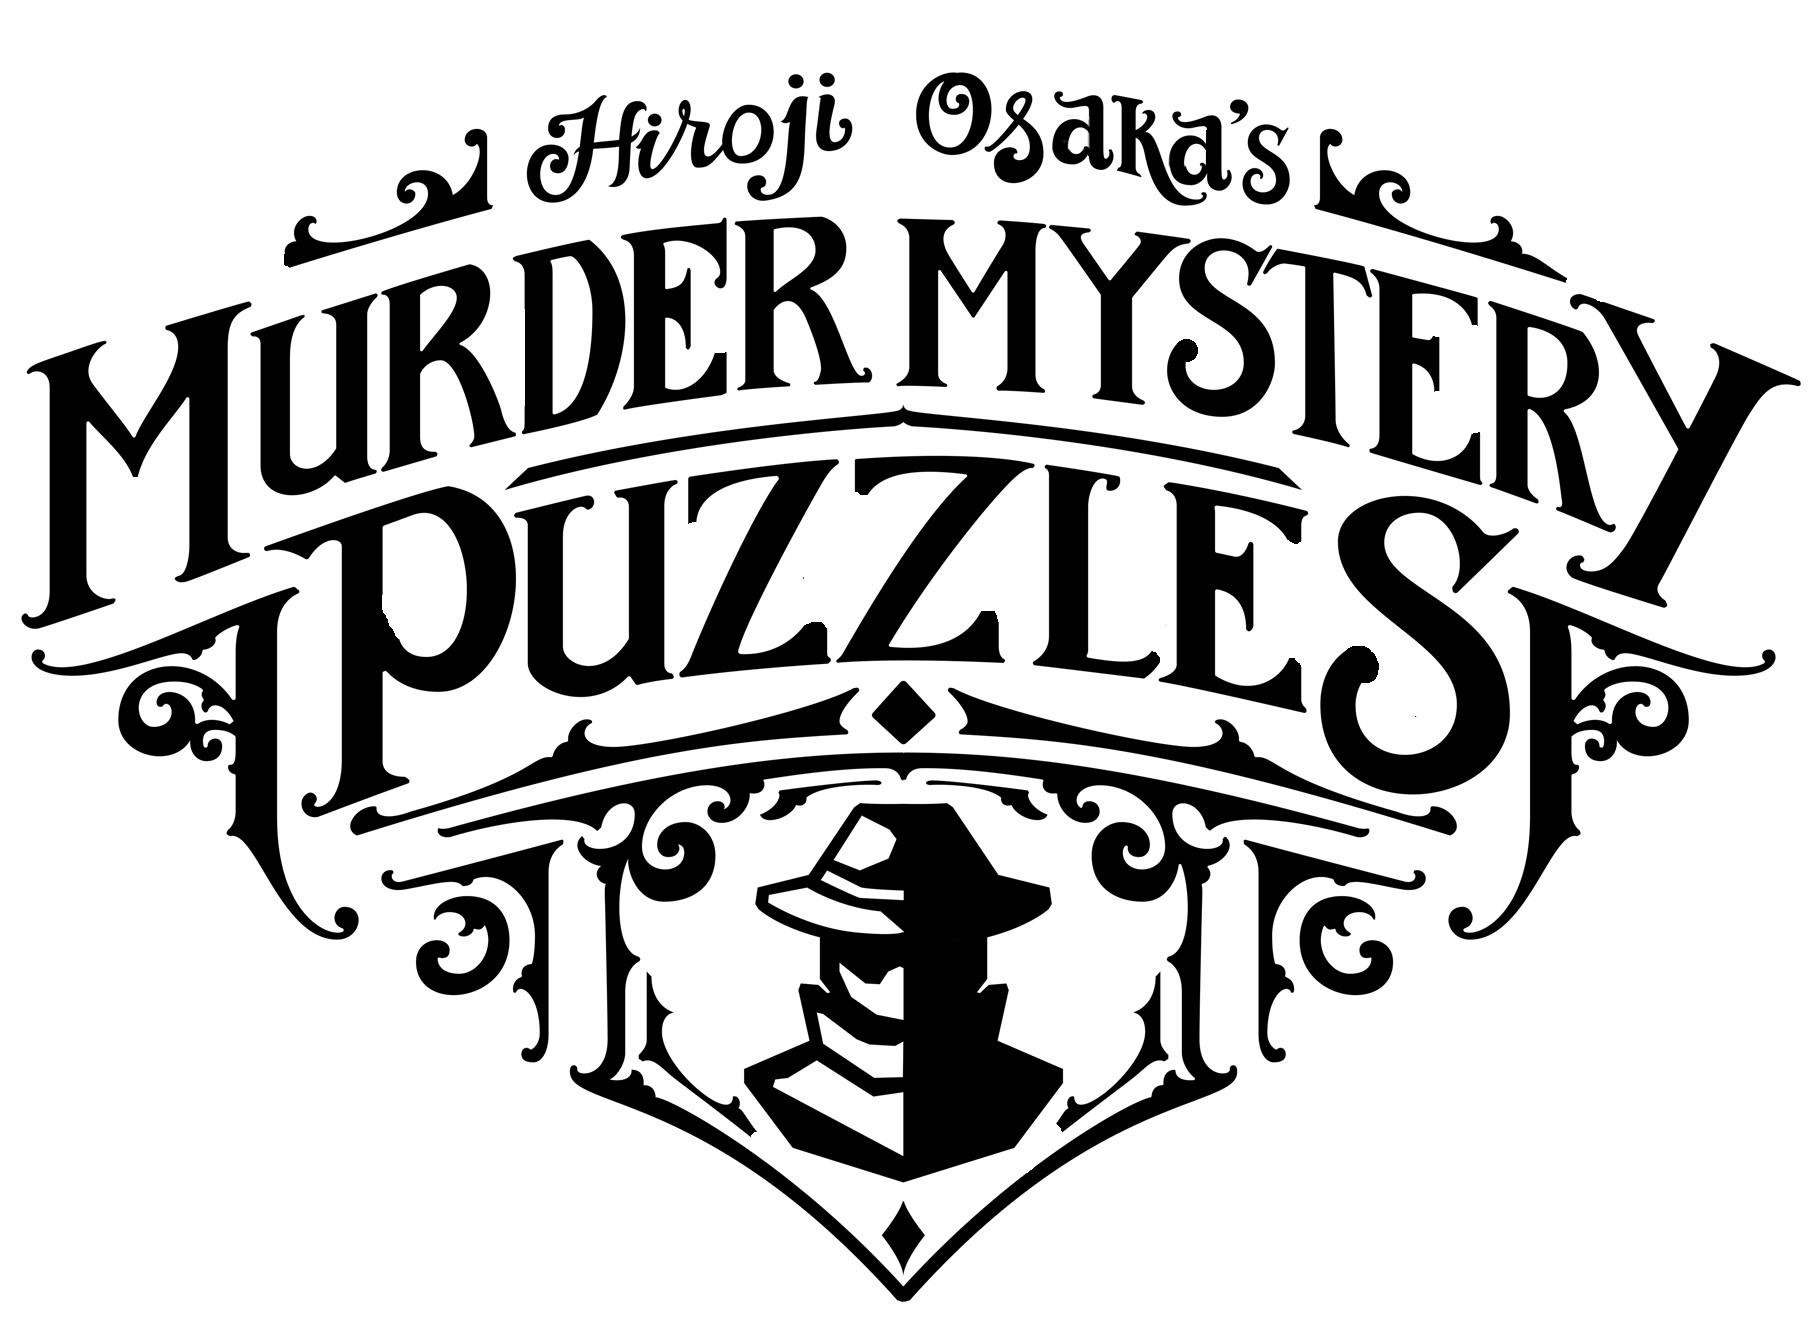 murder mystery puzzles logo,  victorian style black fontt